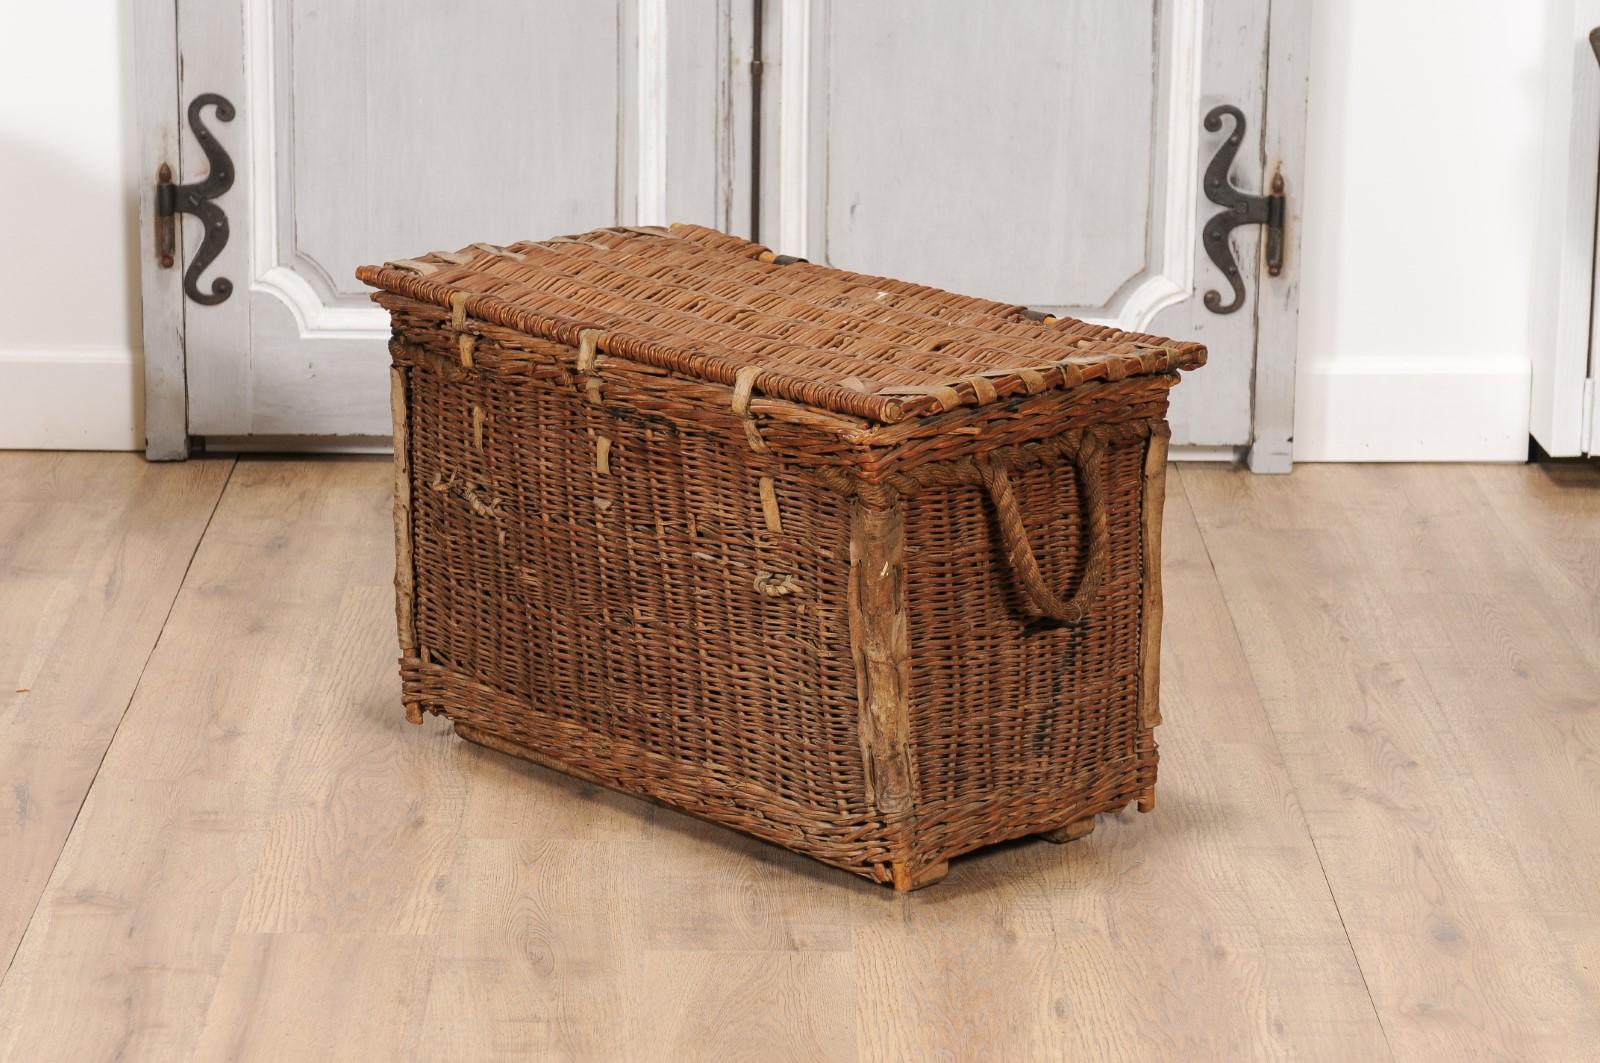 English Rustic 1930s Wicker Trunk with Iron Hardware and Lateral Handles For Sale 3